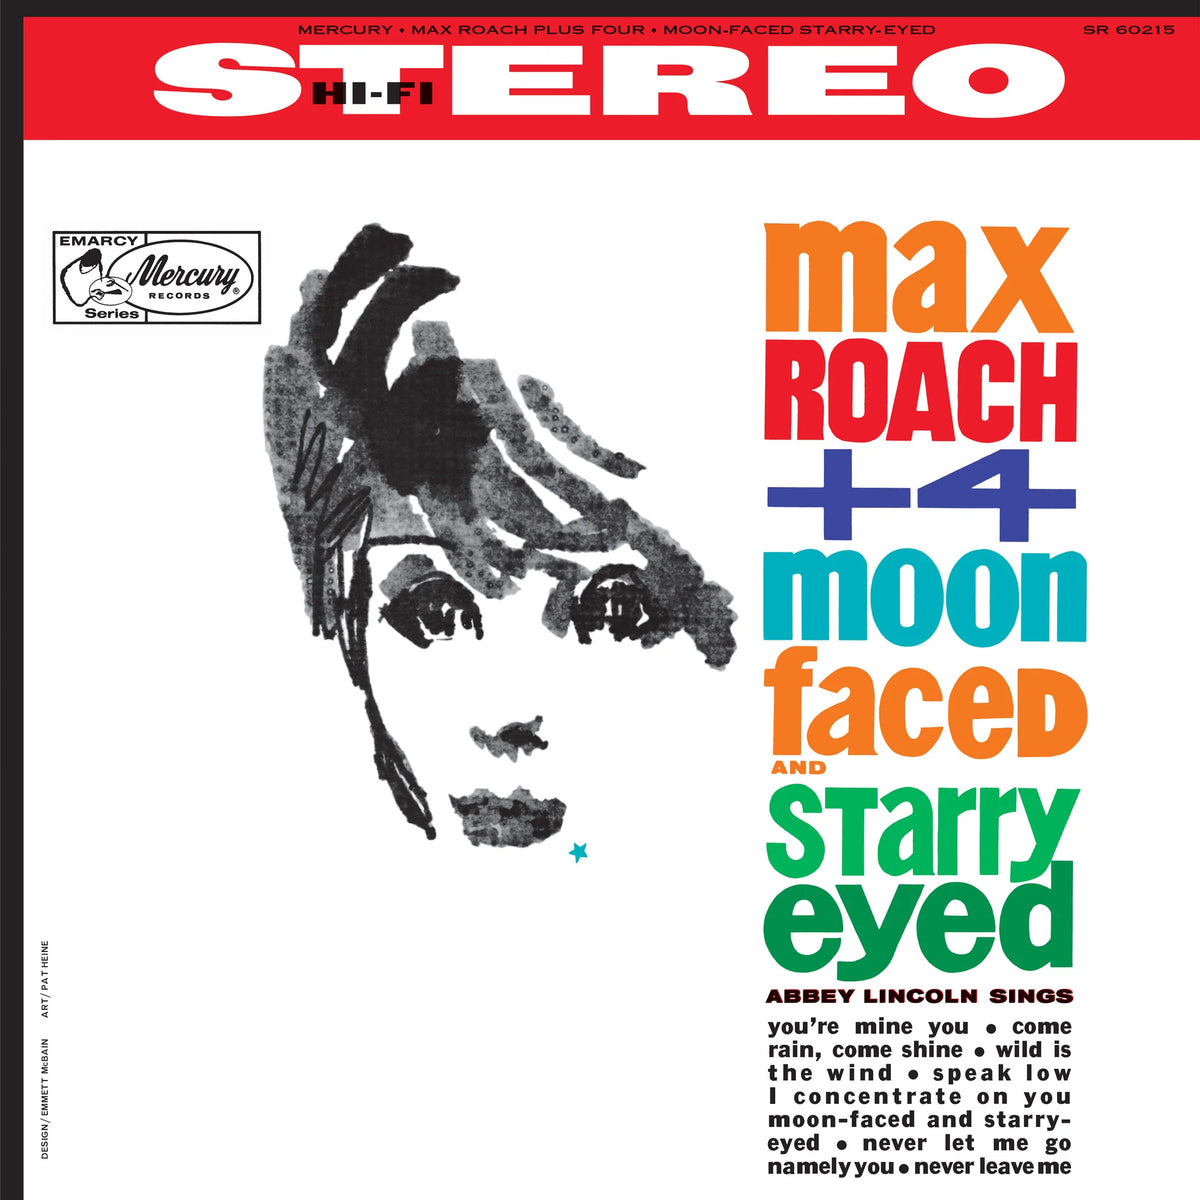 Max Roach + 4 - Moon Faced And Starry Eyed